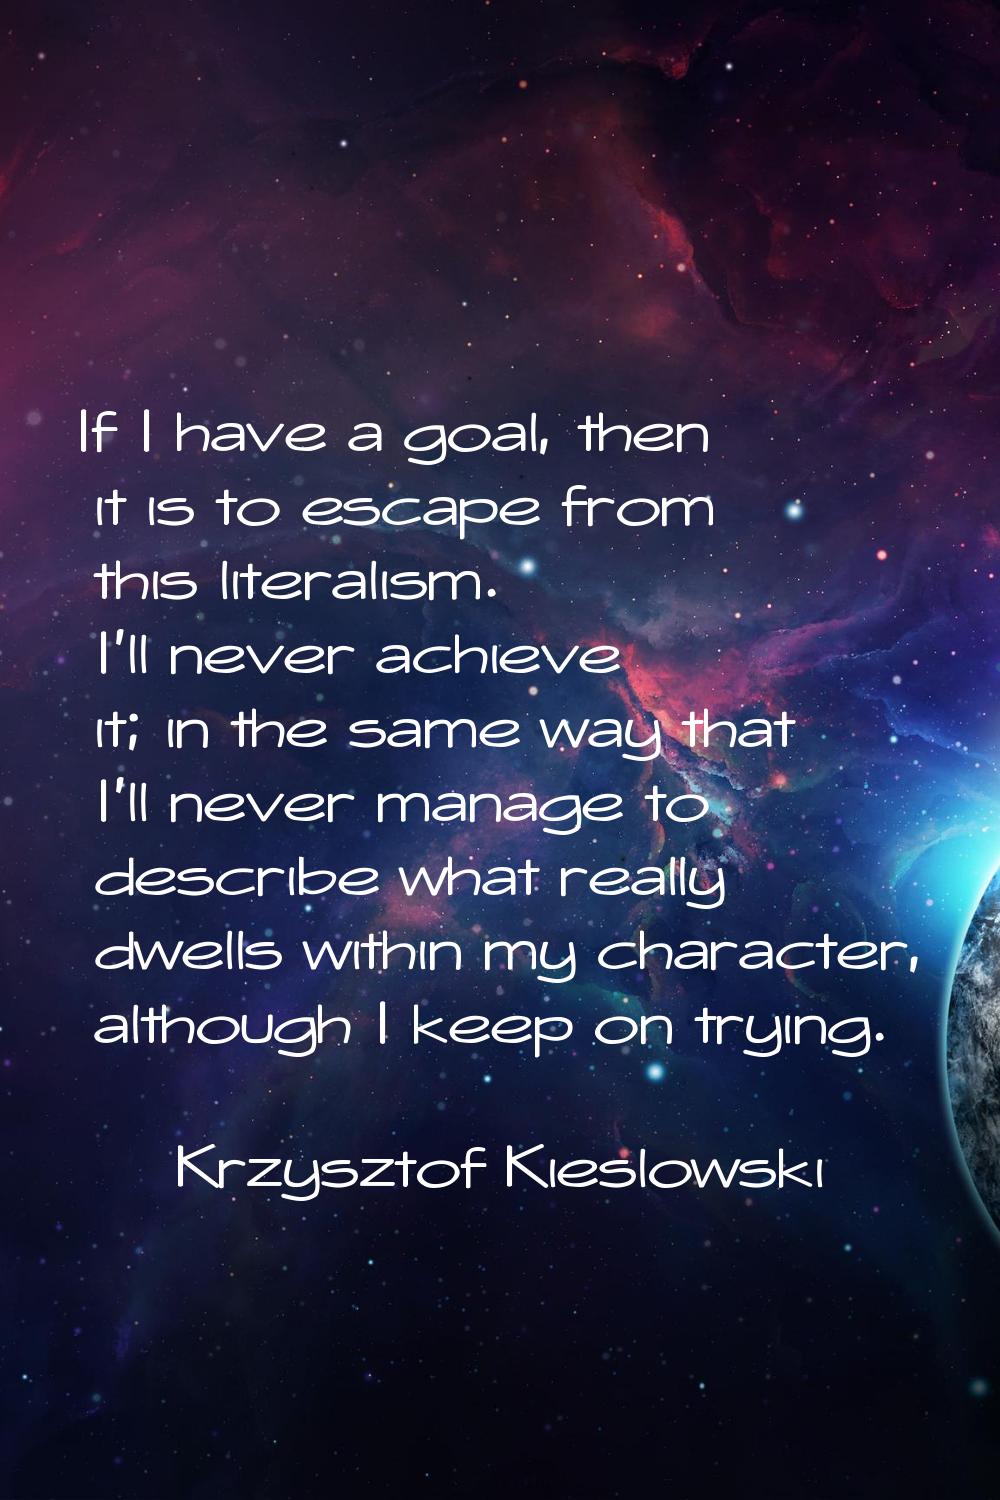 If I have a goal, then it is to escape from this literalism. I'll never achieve it; in the same way